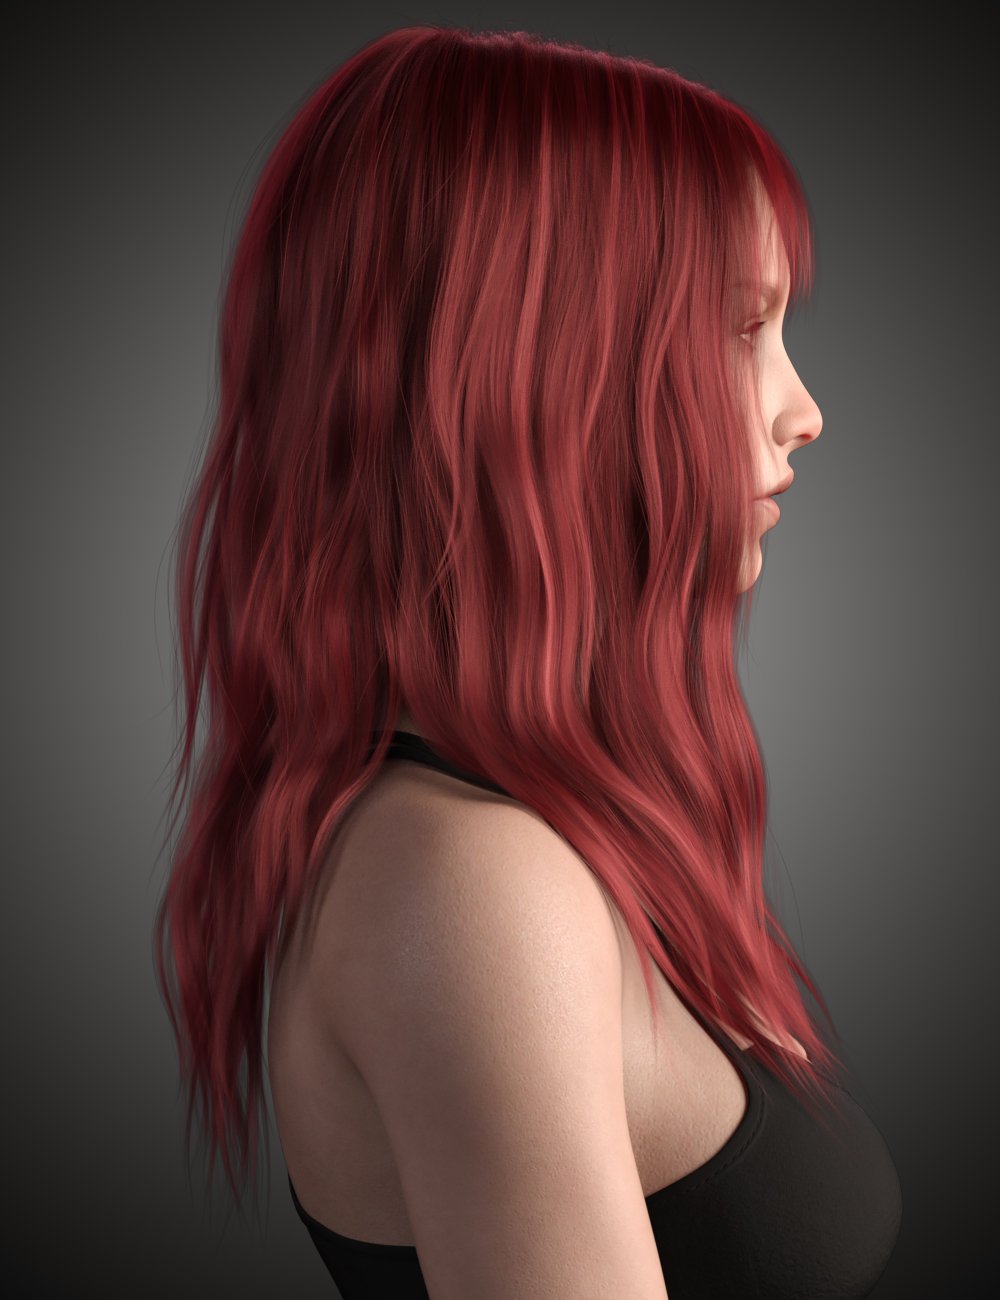 Flora Hair For Genesis 8 and 8.1 Female by: WindField, 3D Models by Daz 3D